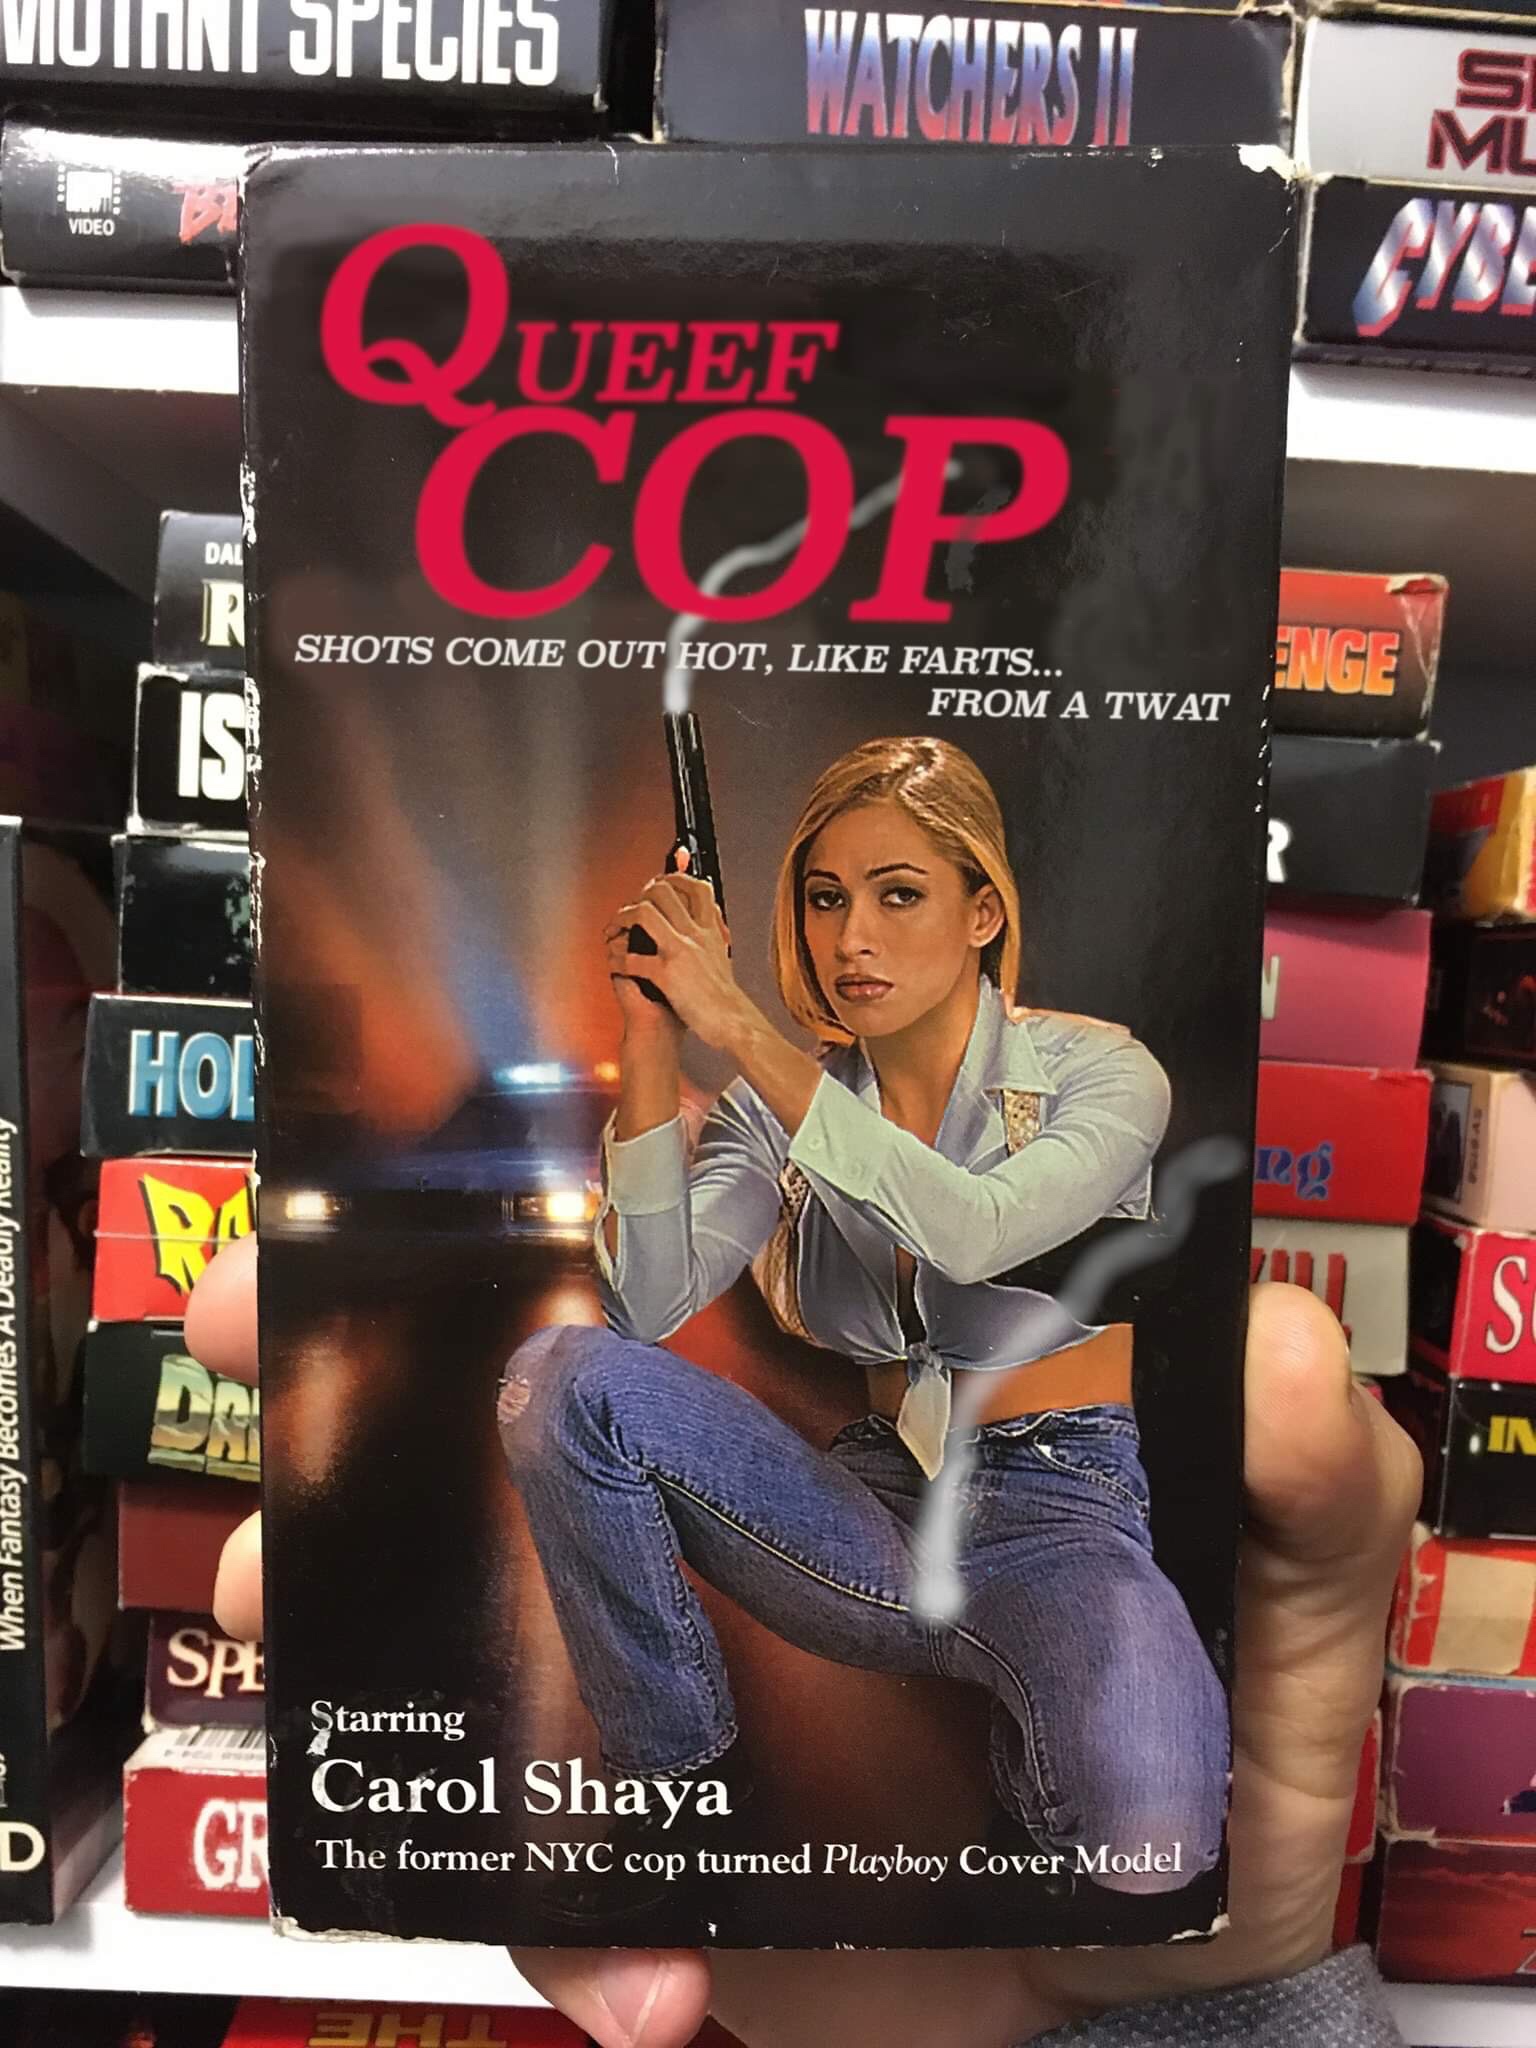 queef cop movie - Vuien Spelies end Ueef Shots Come Out Hot. Farts... From A Twat a Bcidad When Spe Starring Carol Shaya Gn The former Nyc cop turned Playboy Cover Model